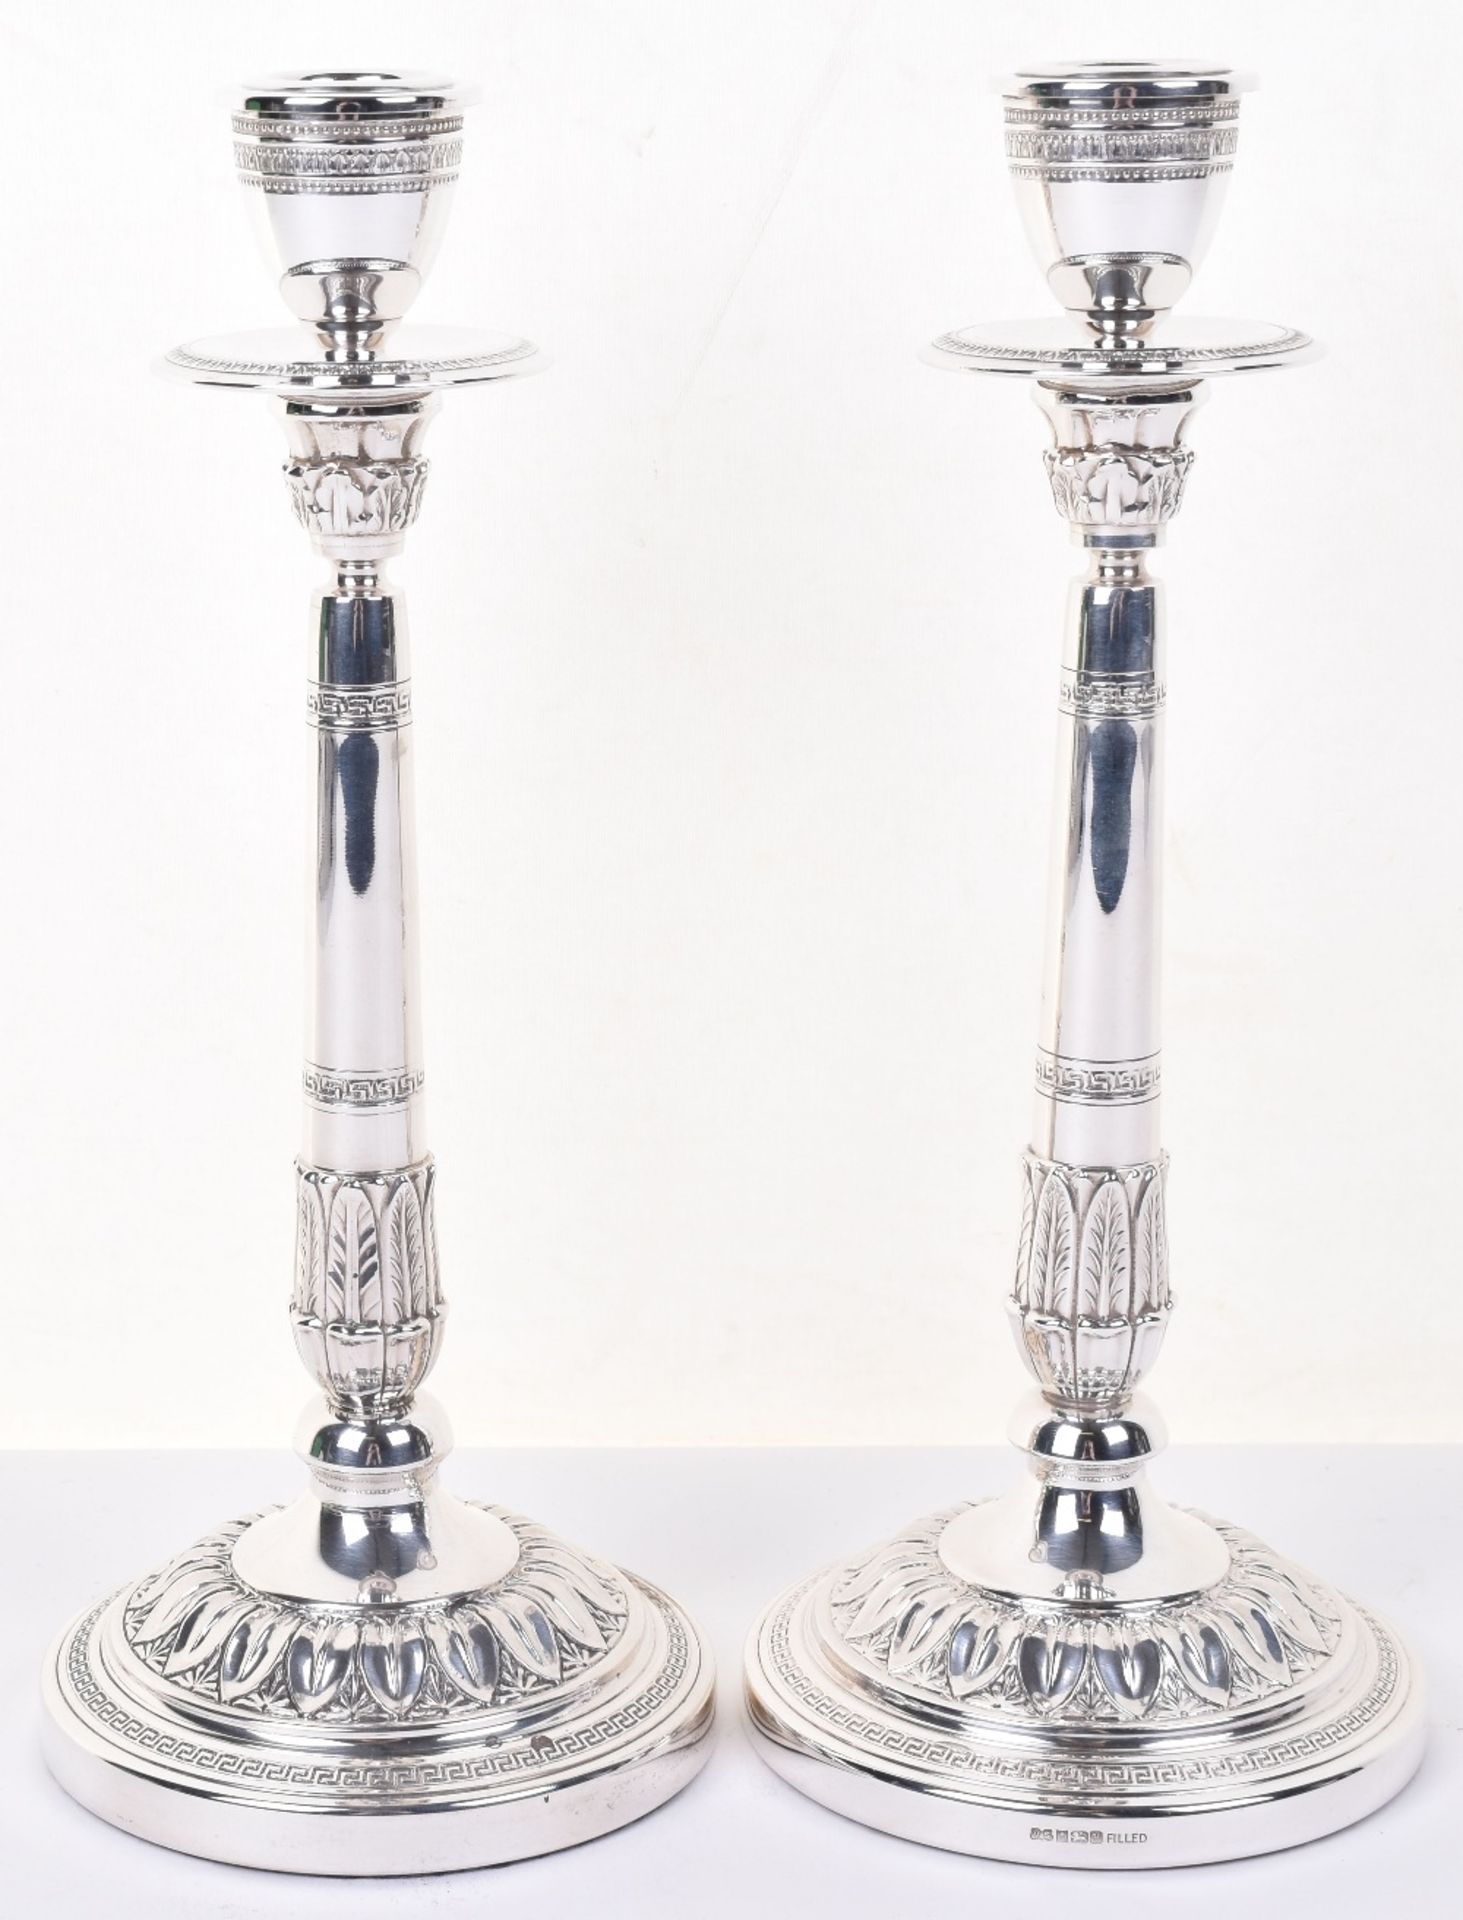 A pair of 20th century silver candlesticks, Birmingham 1998 - Image 2 of 5